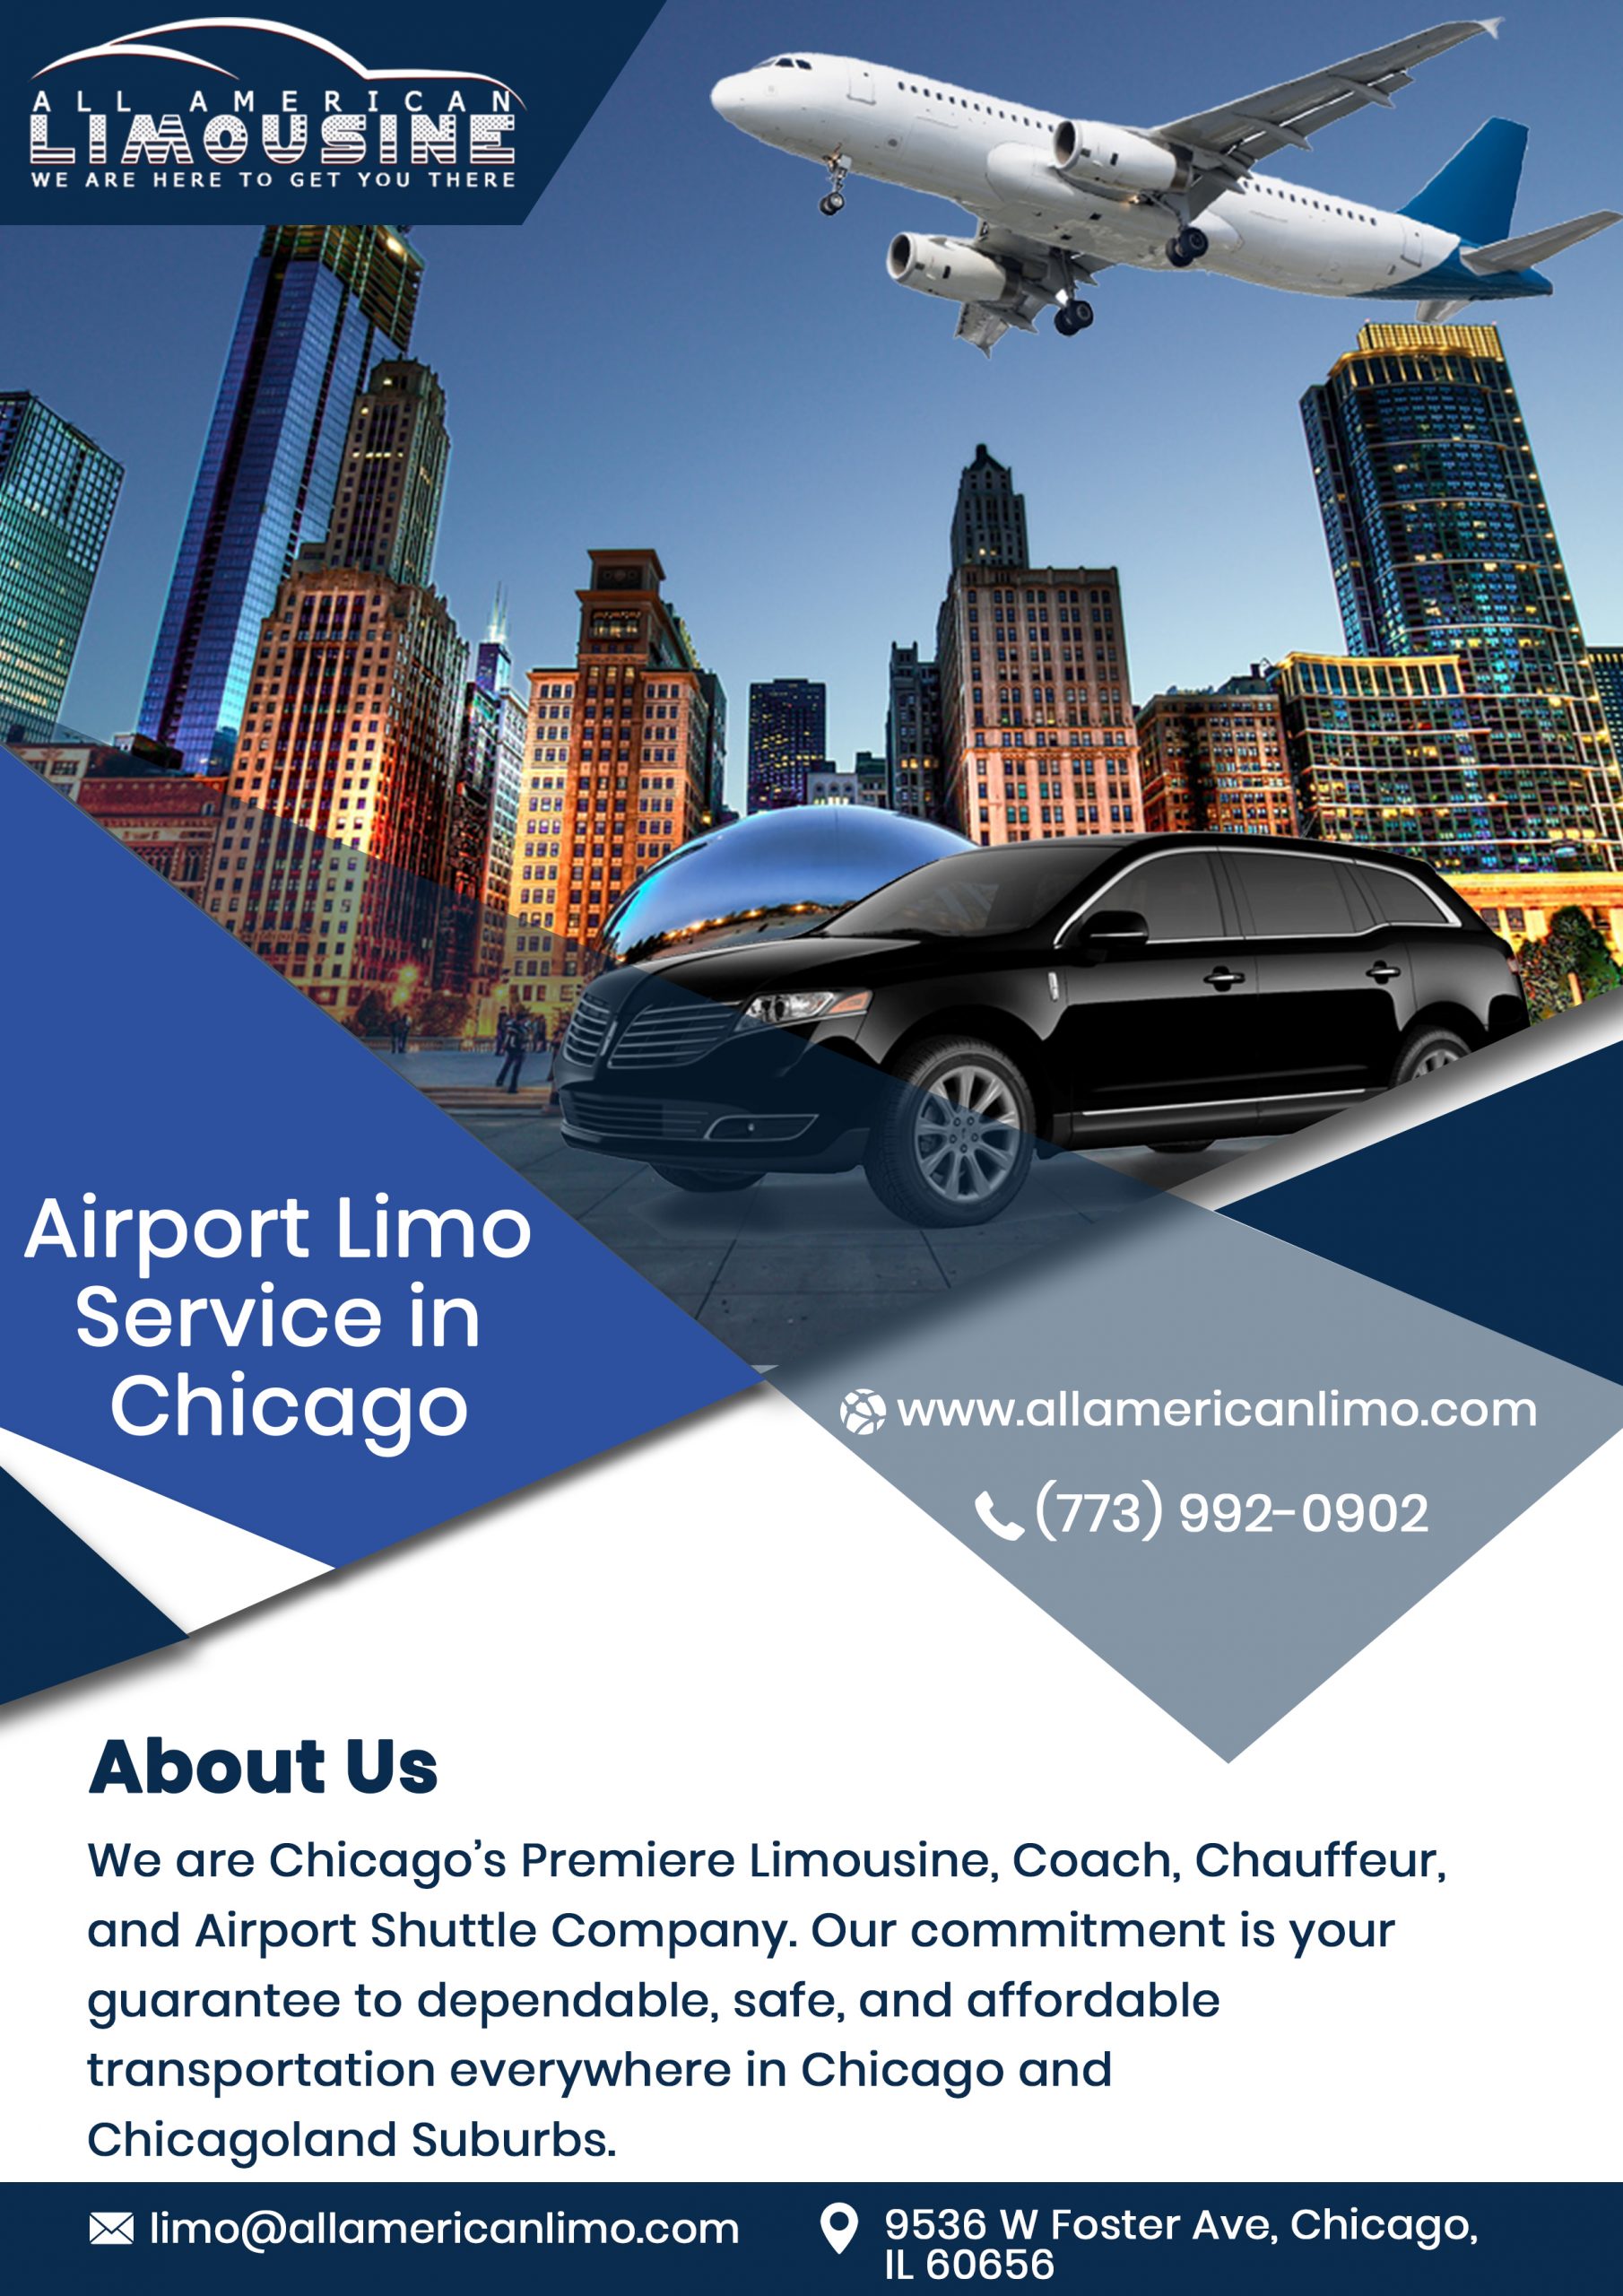 Chicago Car Service Near Me 60641, Party Bus 60641, Mercedes Sprinter Limo to 60641, Chicago Limo 60641, Limo Service 60641 to Airport, Hire, Rent, Get, Find, Car Service 60641 to Airport, Transportation Service 60641 to O'Hare, Corporate Travel 60641, Airport Travel 60641